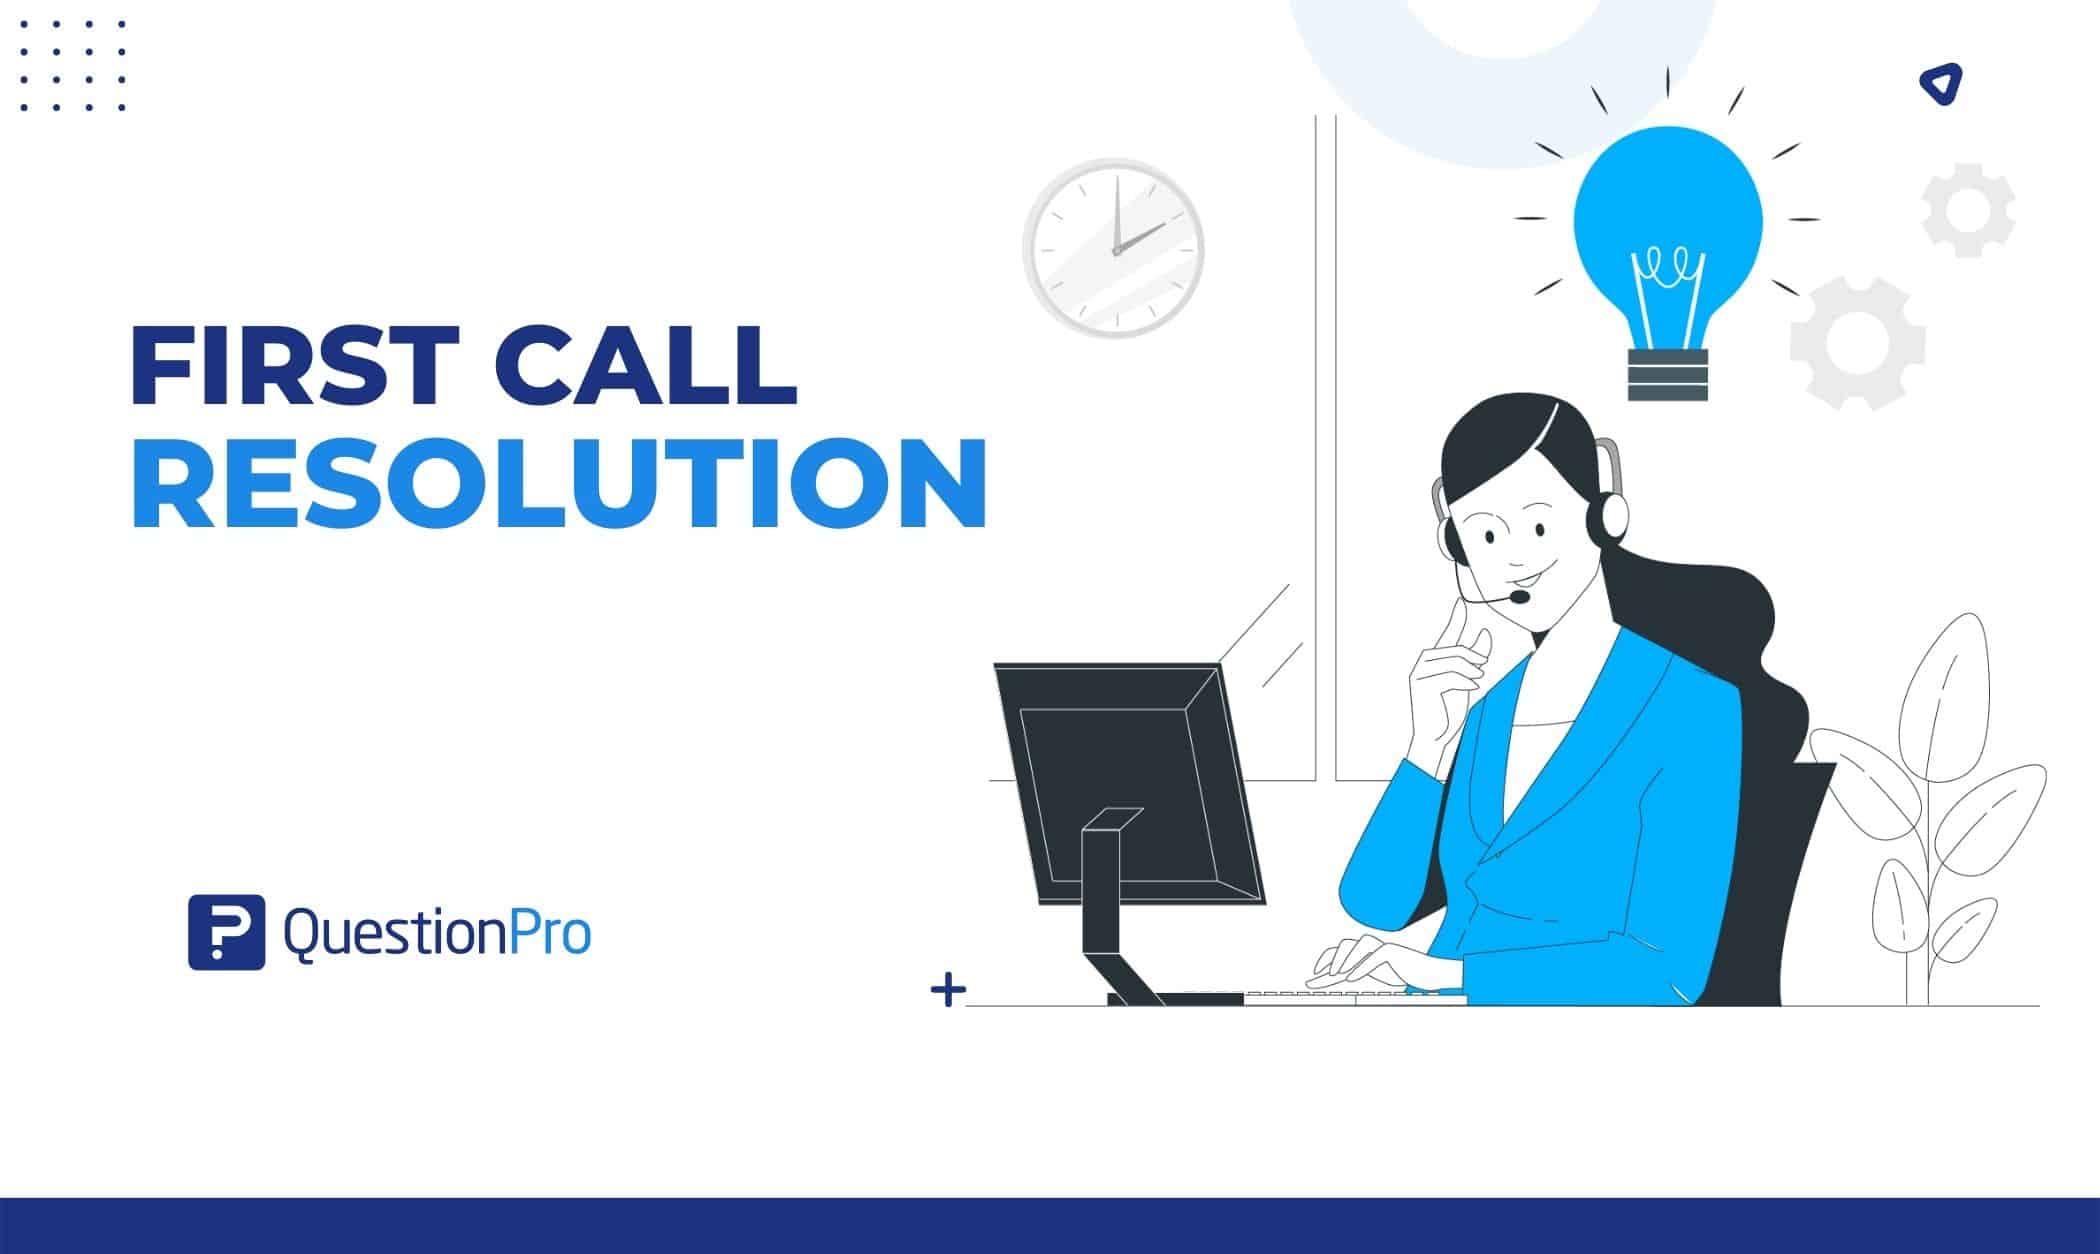 To improve your first call resolution, train your customer service agents. Support team should be knowledgeable about products. Learn more.